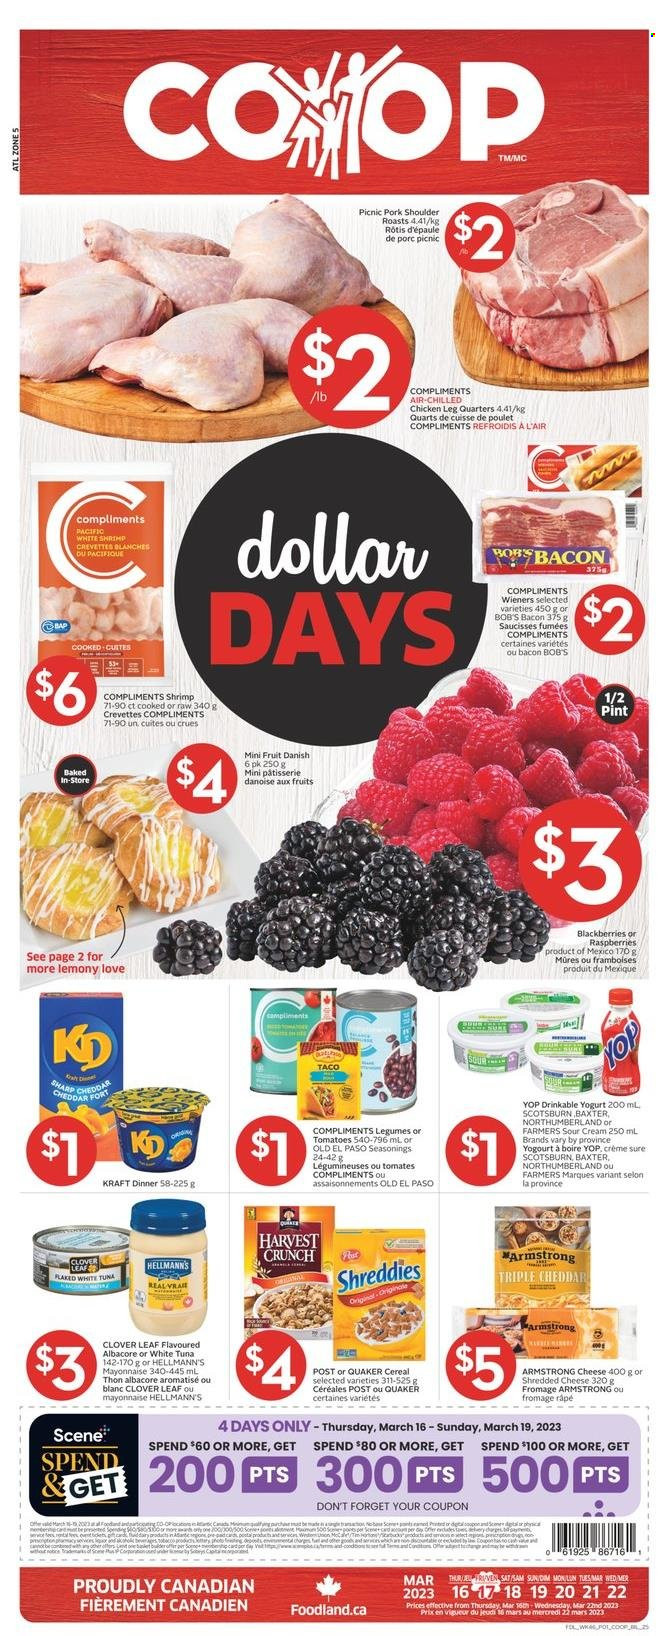 thumbnail - Co-op Flyer - March 16, 2023 - March 22, 2023 - Sales products - Old El Paso, tomatoes, blackberries, tuna, shrimps, Quaker, Kraft®, bacon, shredded cheese, cheddar, yoghurt, Clover, sour cream, mayonnaise, Hellmann’s, Mars, cereals, chicken legs, pork meat, pork shoulder, Sure, pot. Page 1.